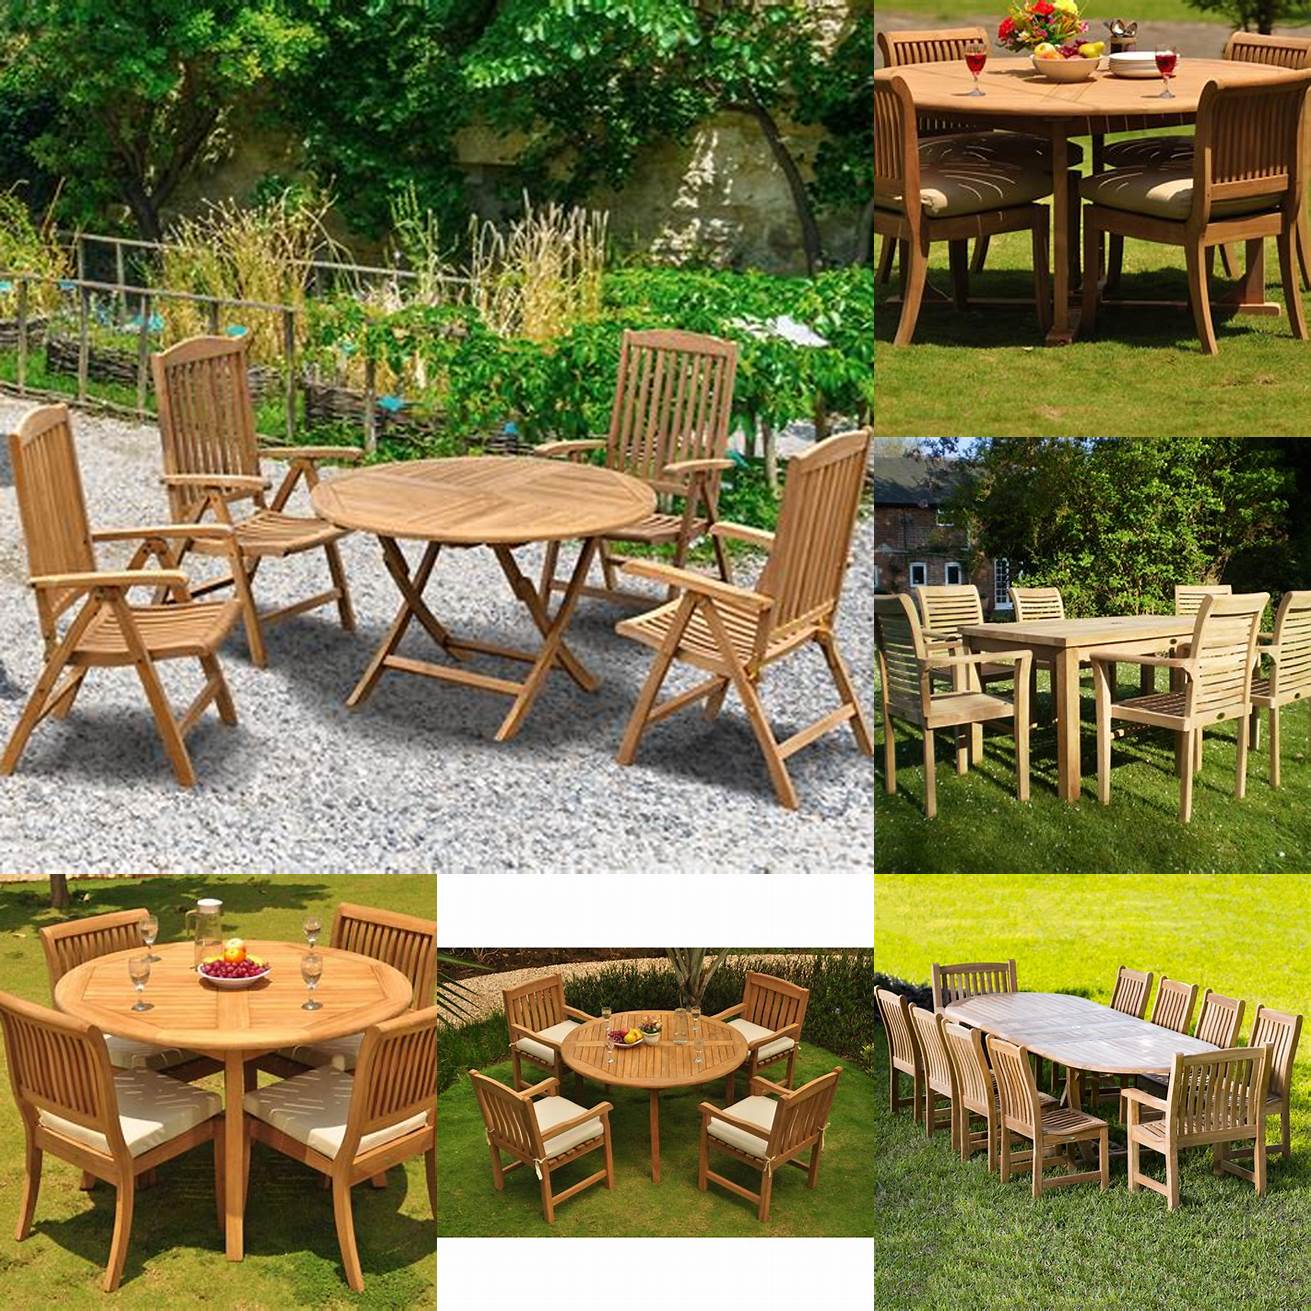 Teak Table and Chairs in the Garden